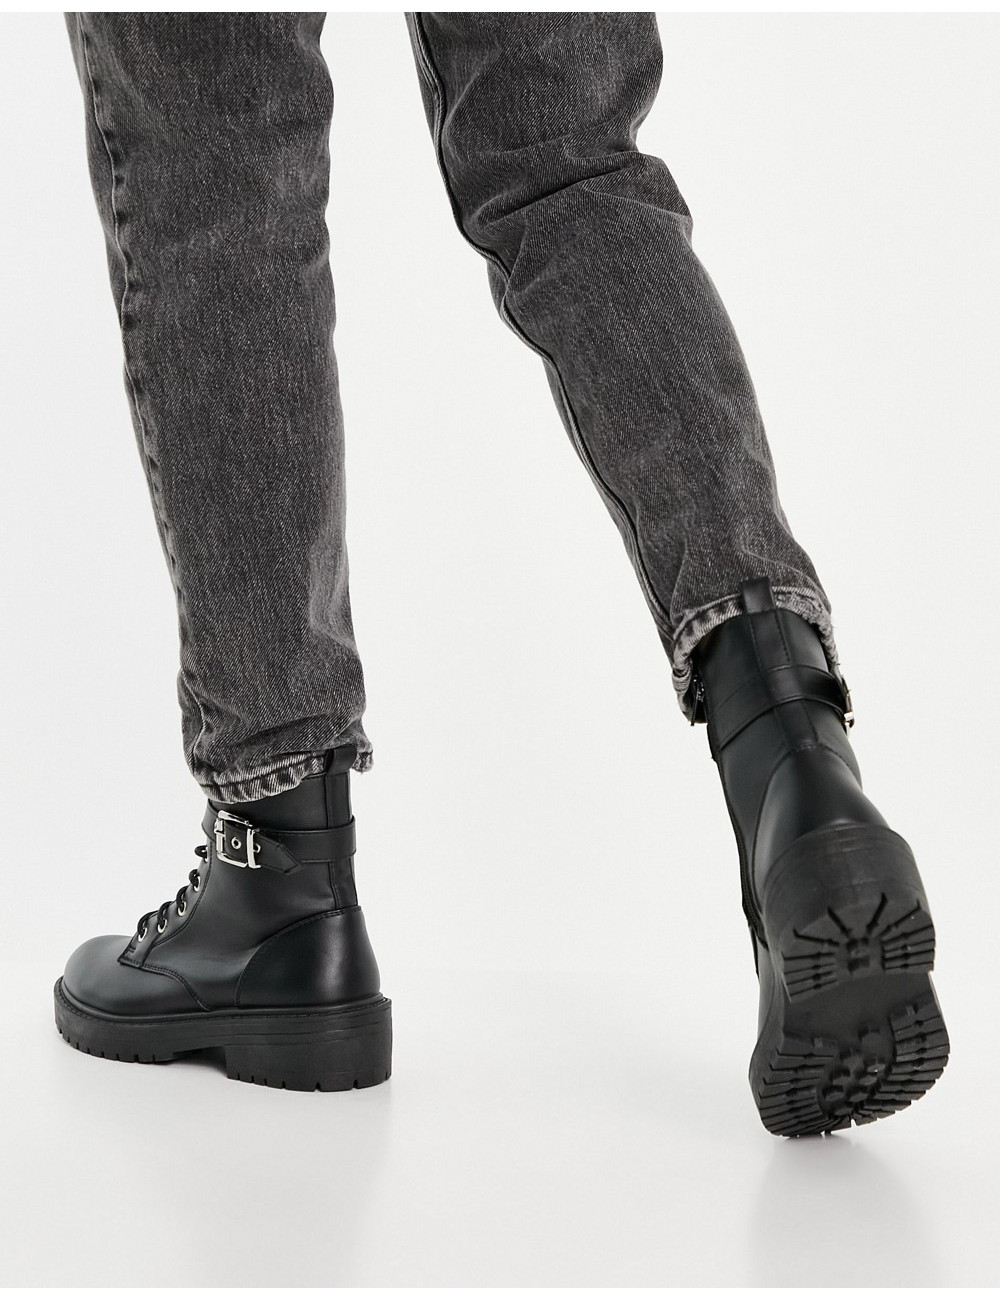 New Look lace up boot in black